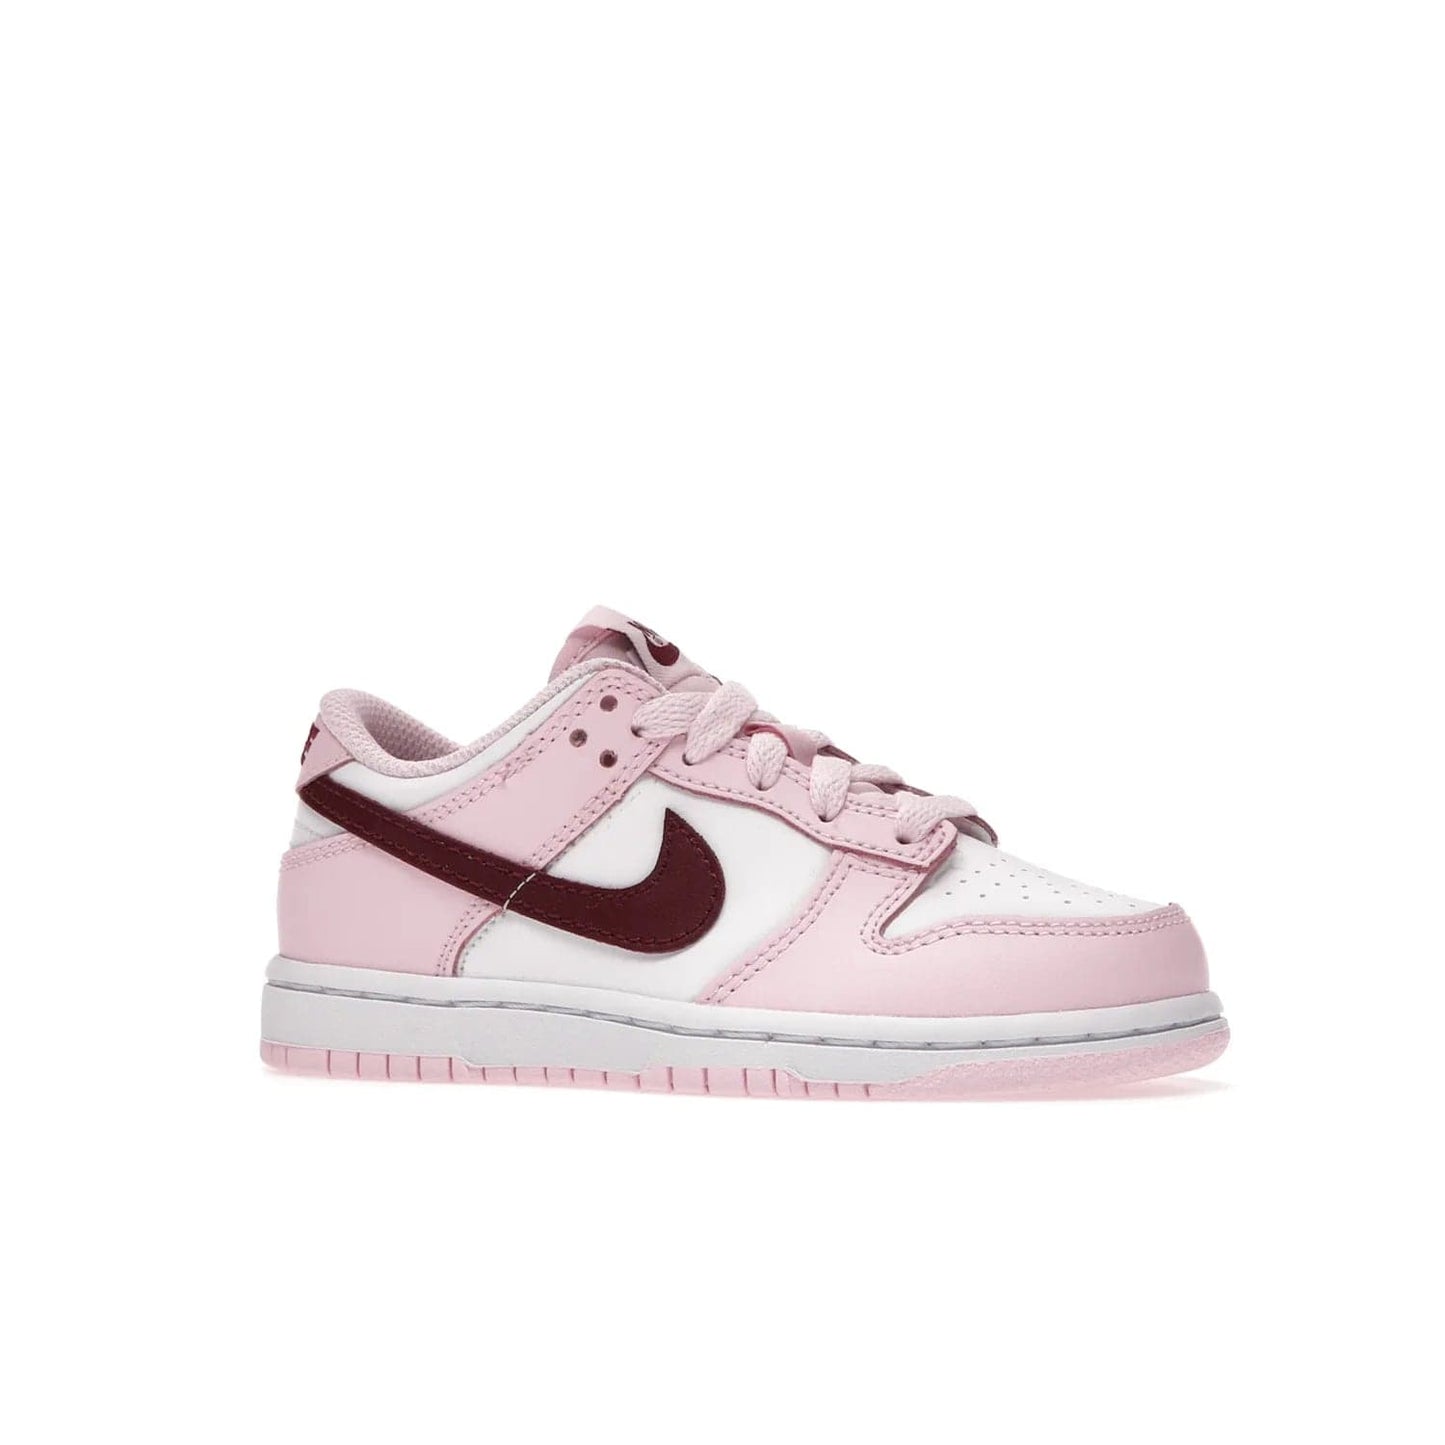 Nike Dunk Low Pink Red White (PS) - Image 3 - Only at www.BallersClubKickz.com - Introducing the Nike Dunk Low Pink Red White (PS), the perfect addition to your sneaker collection. A classic silhouette with modern vibrant colors, including a pink upper with red and white accents and a white midsole. Comfort and durability, perfect for any outfit. Limited edition, available June 22nd.